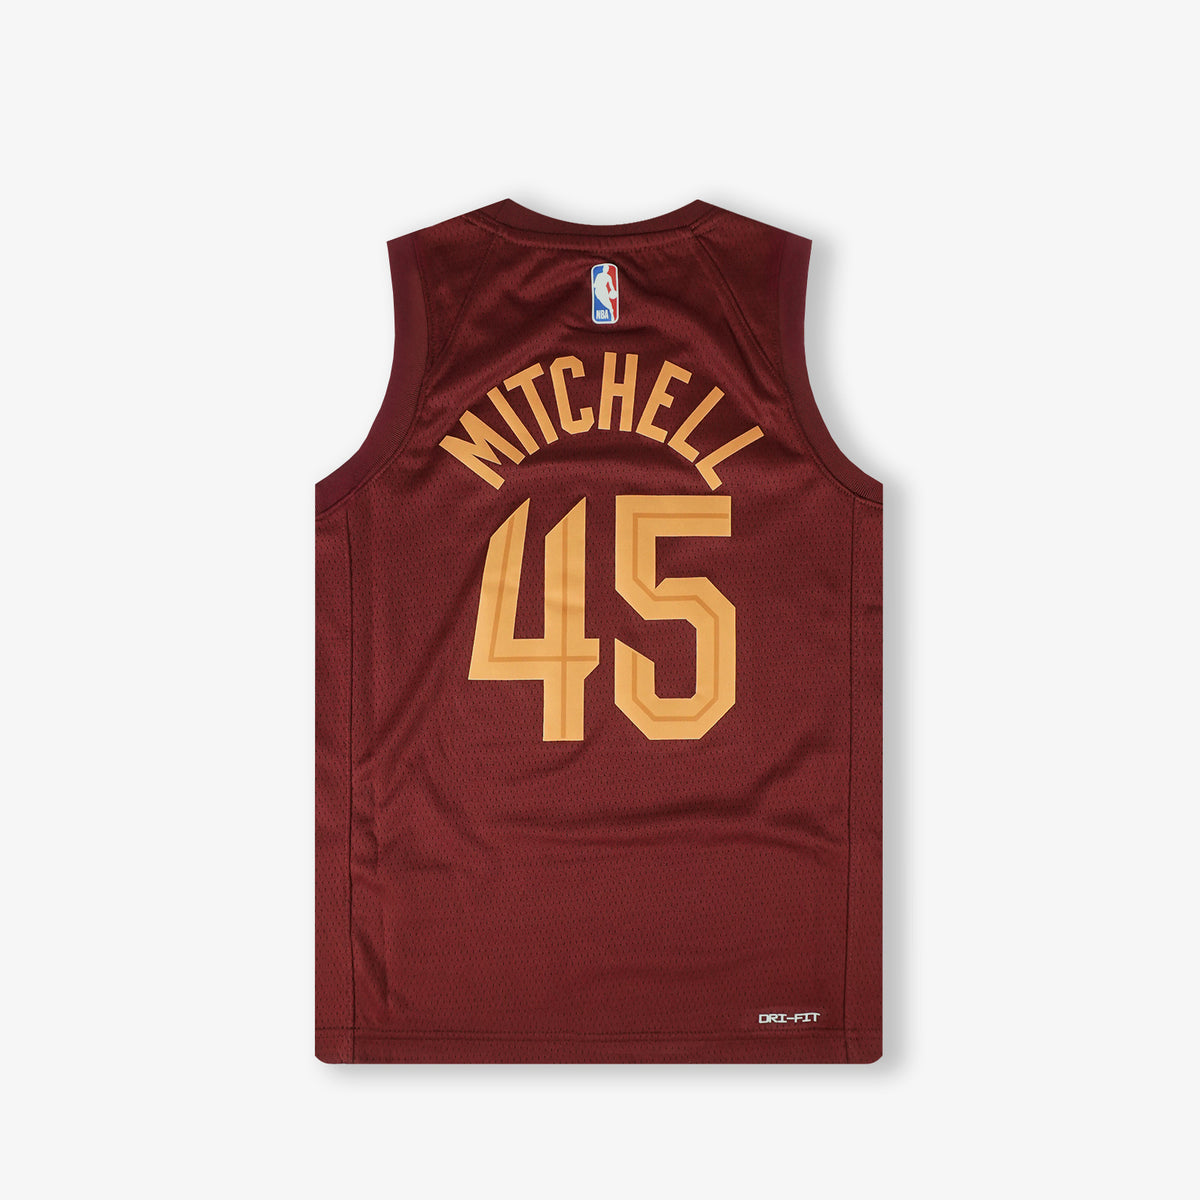 NBA Youth Donovan Mitchell Cleveland Cavaliers